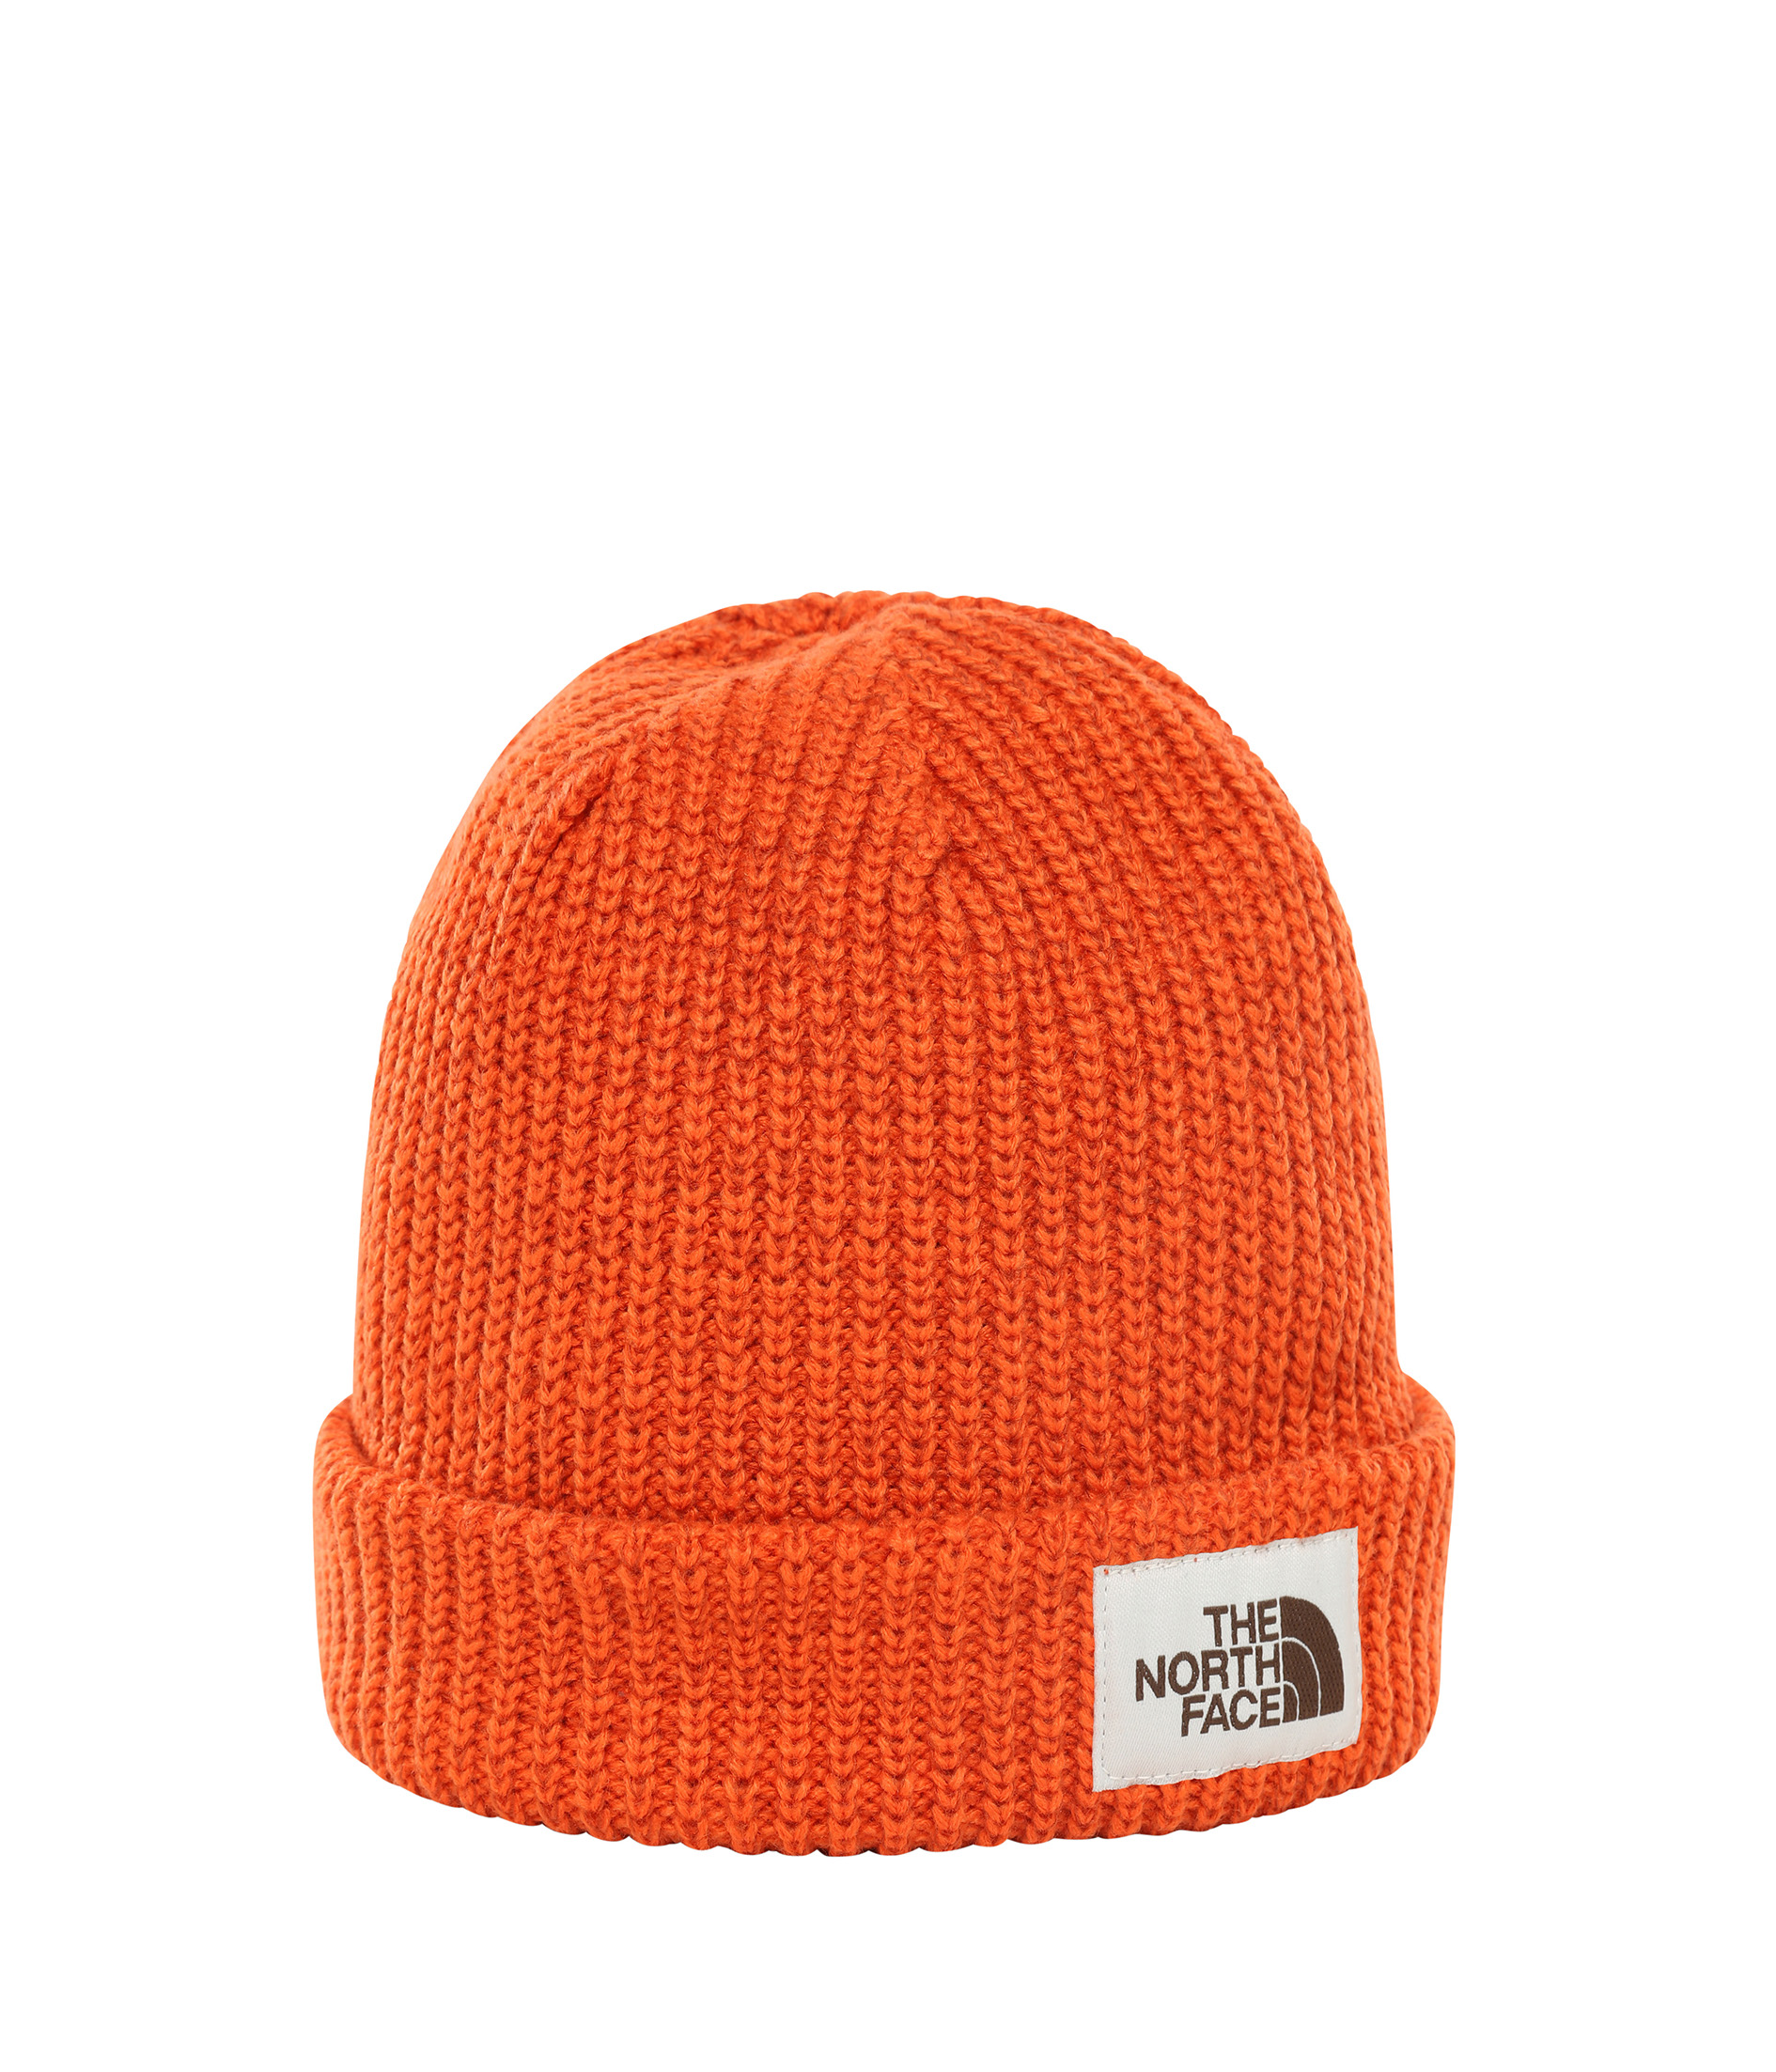 The North Face Salty Dog Beanie Muts